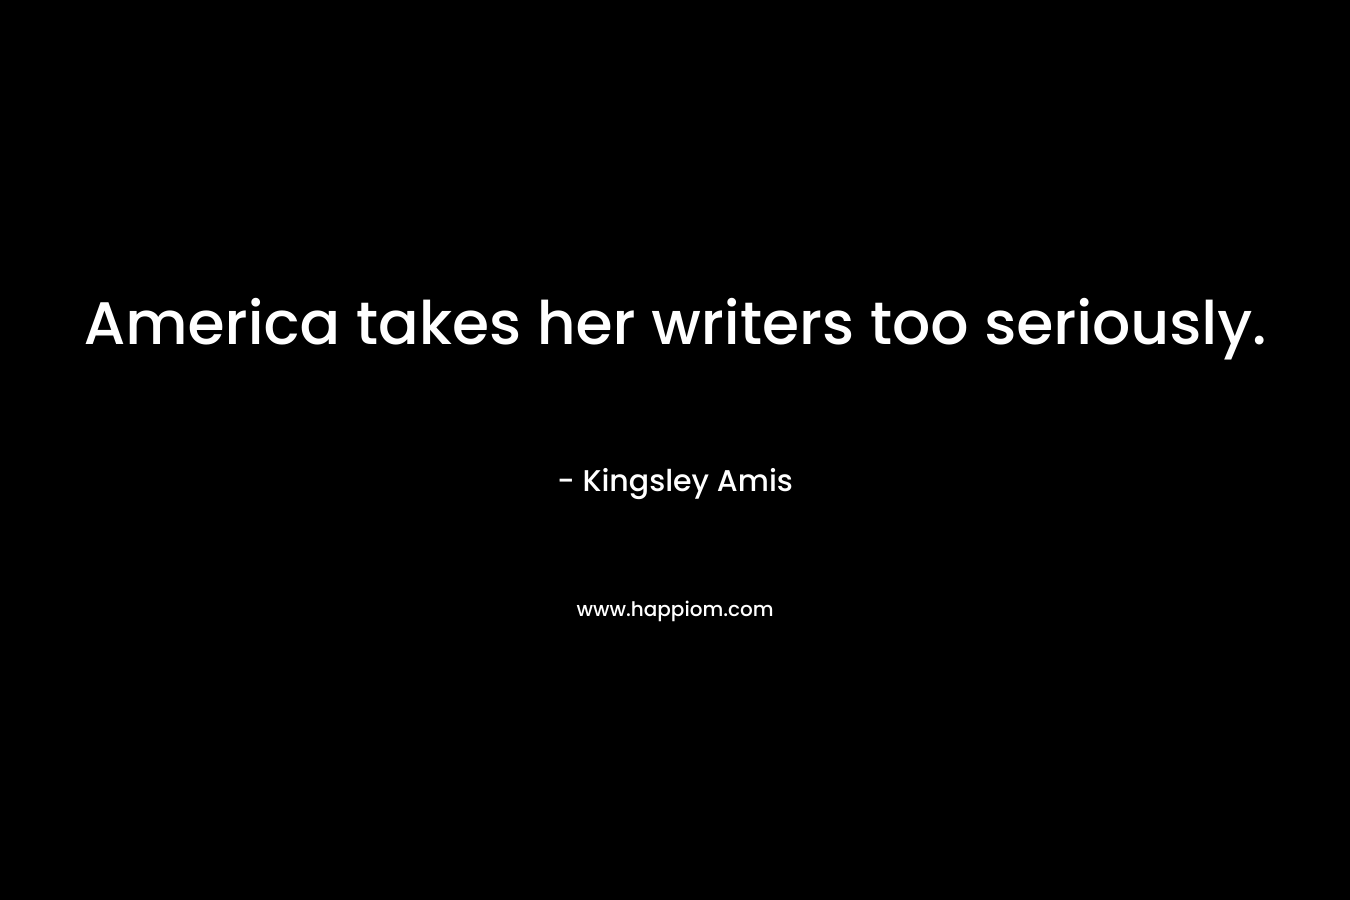 America takes her writers too seriously.